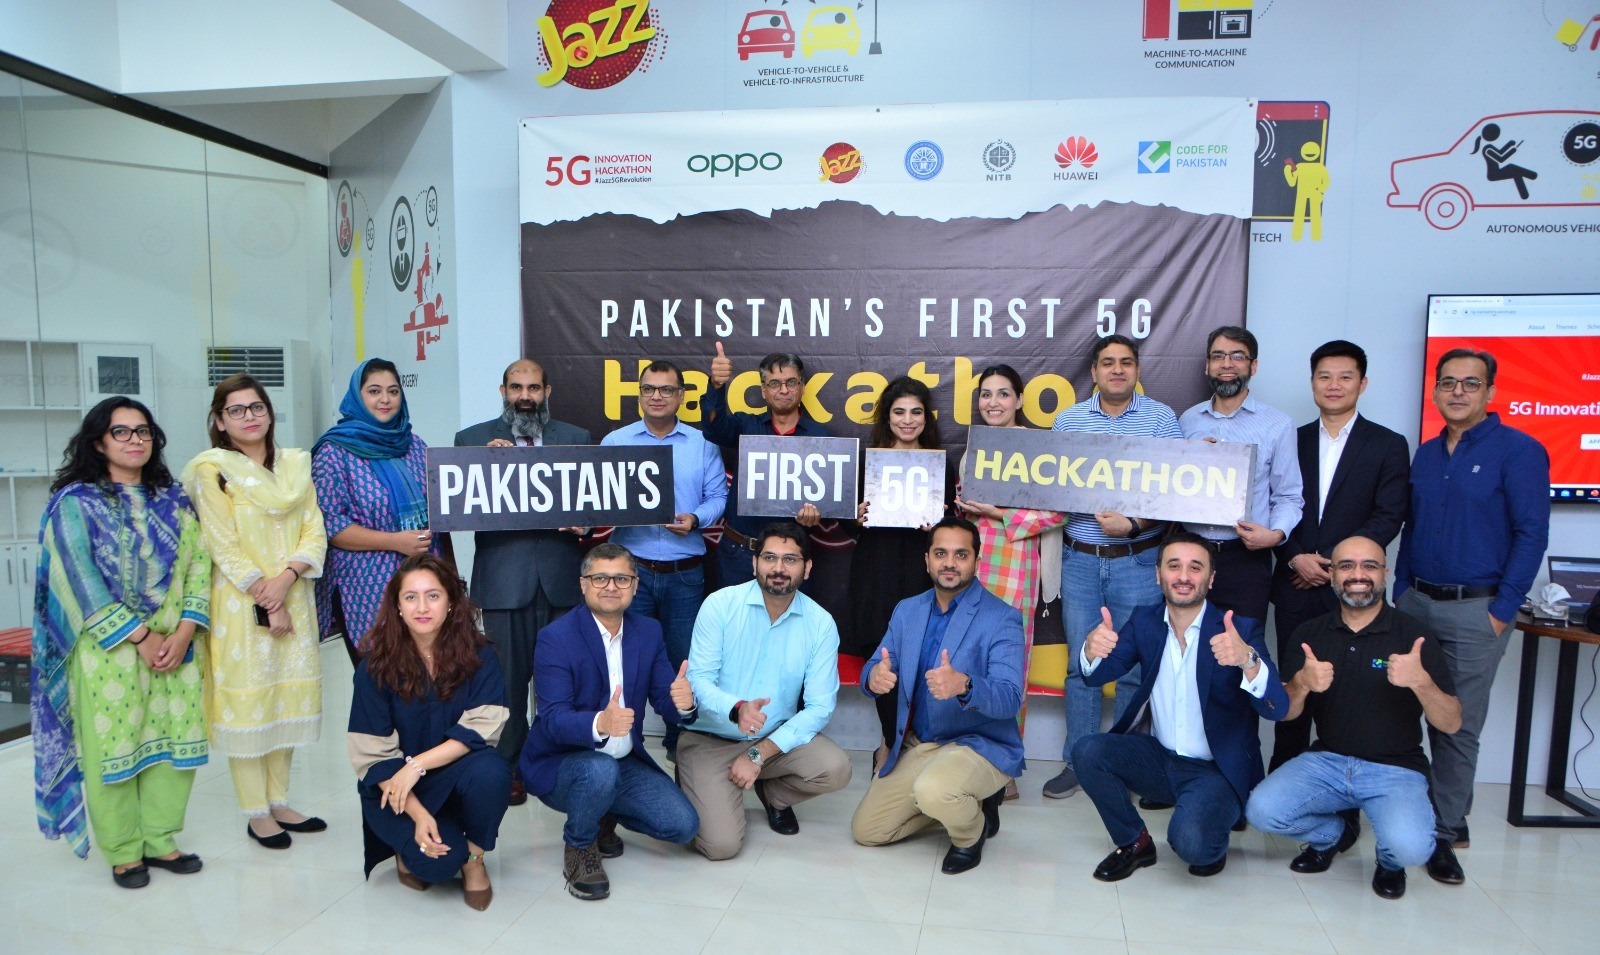 Jazz-NUST 5G Innovation Lab Hosts Pakistan’s First 5G Hackathon in Partnership with NITB and Code for Pakistan